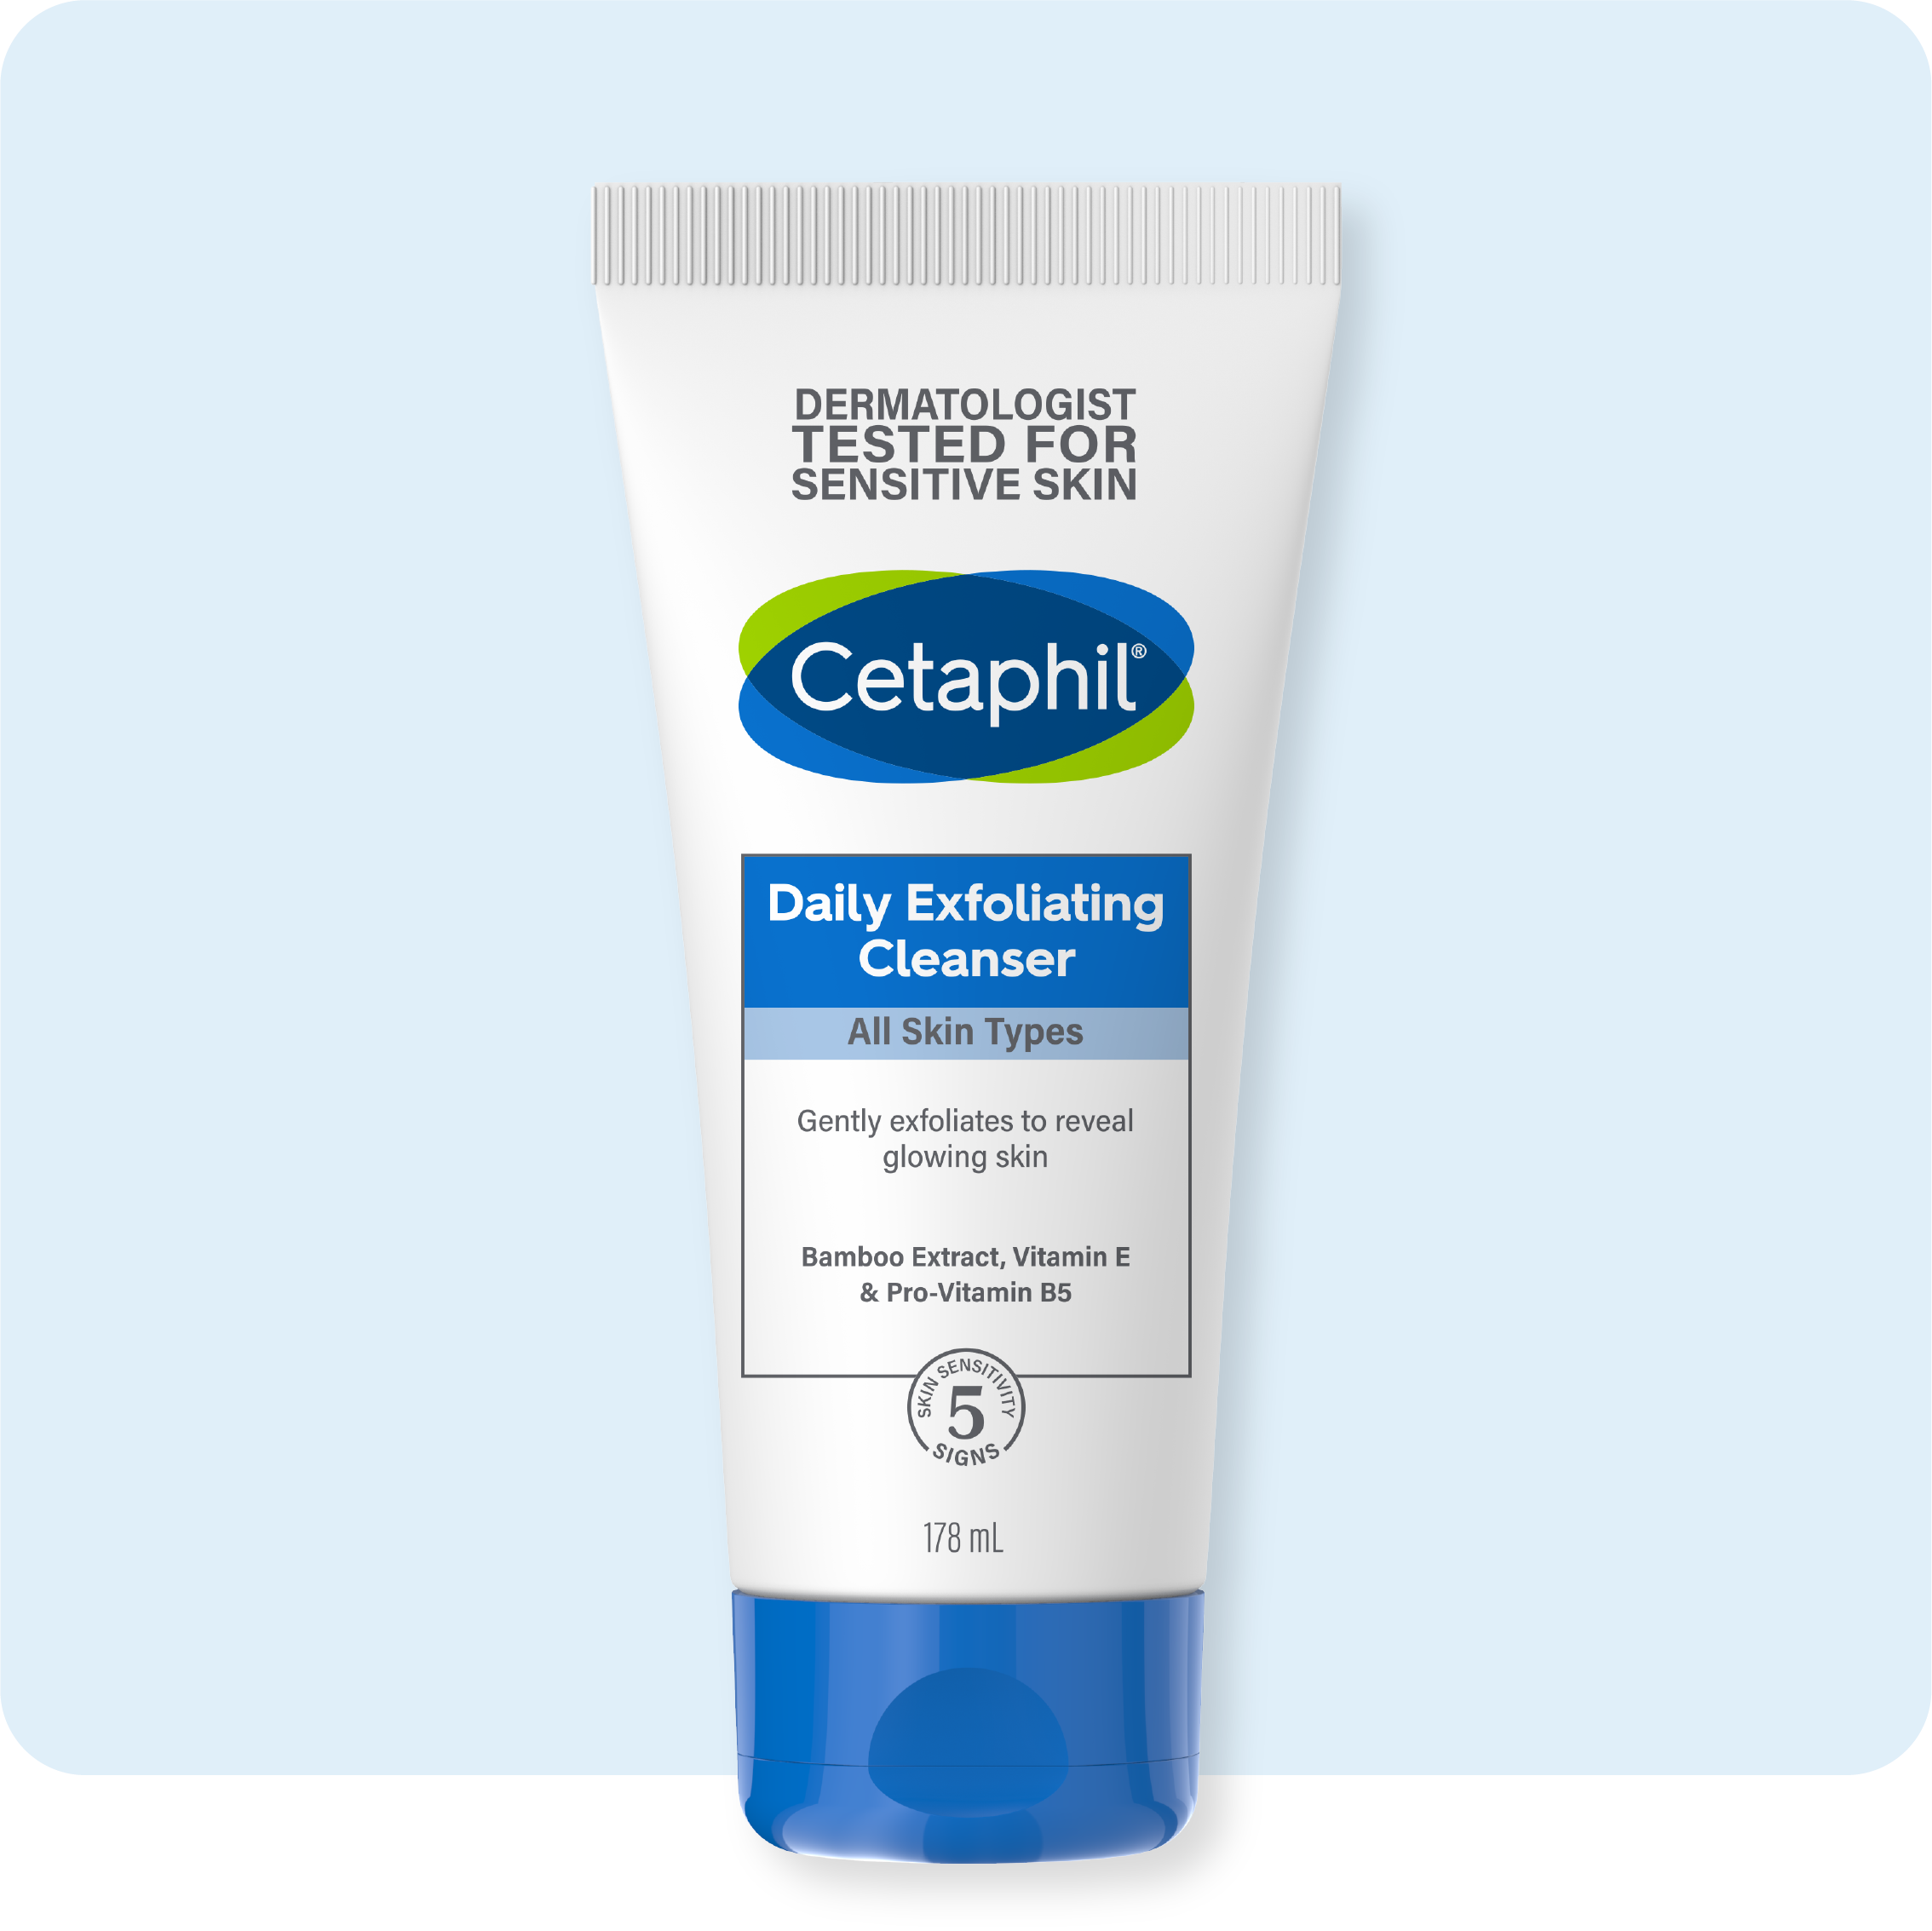 Daily Exfoliating Cleanser